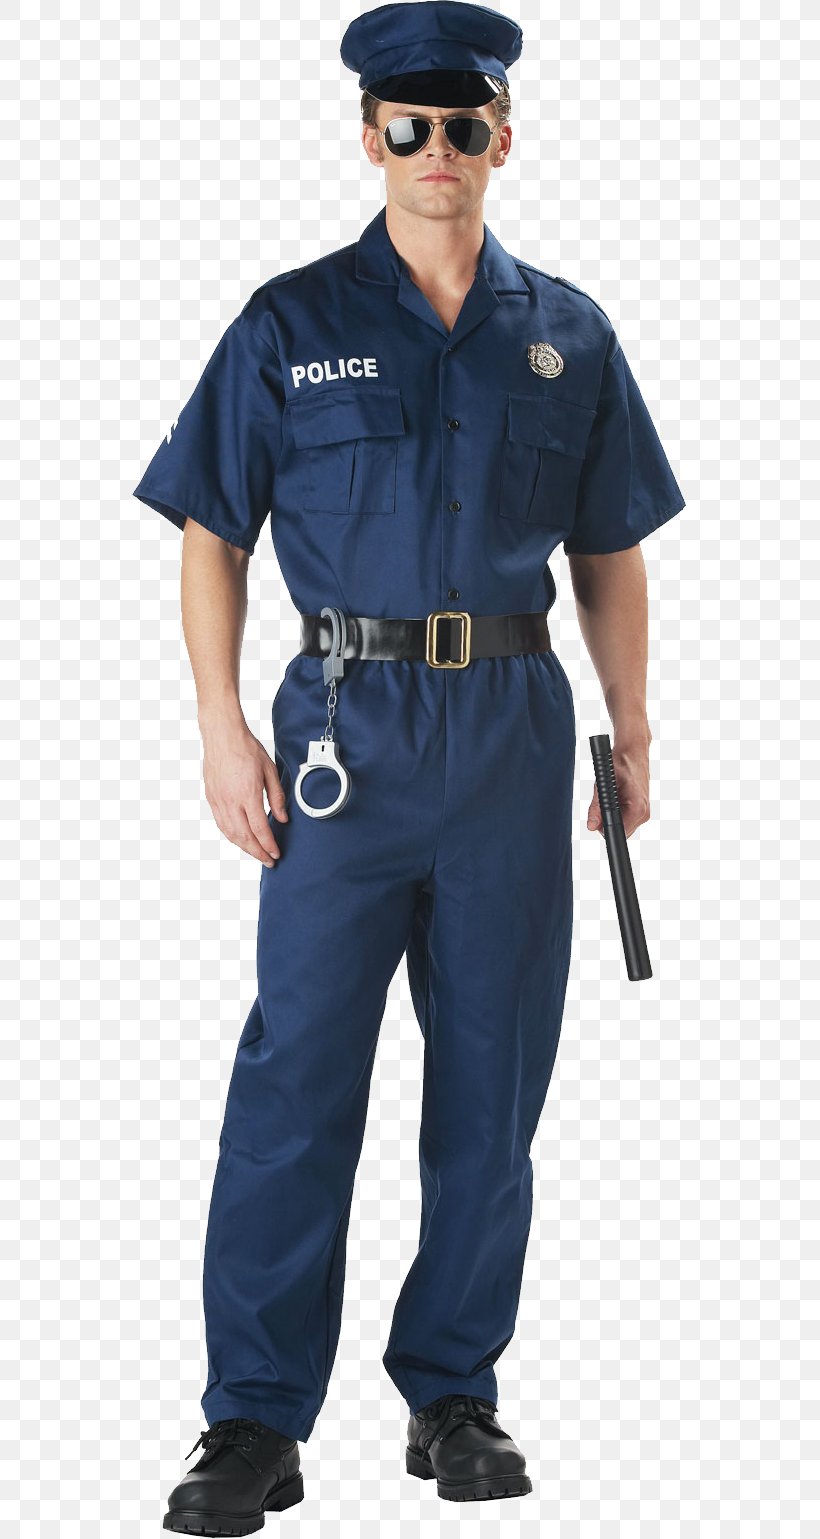 Costume T-shirt Police Officer Clothing Amazon.com, PNG, 555x1539px, Costume, Clothing, Costume Party, Dress, Halloween Costume Download Free